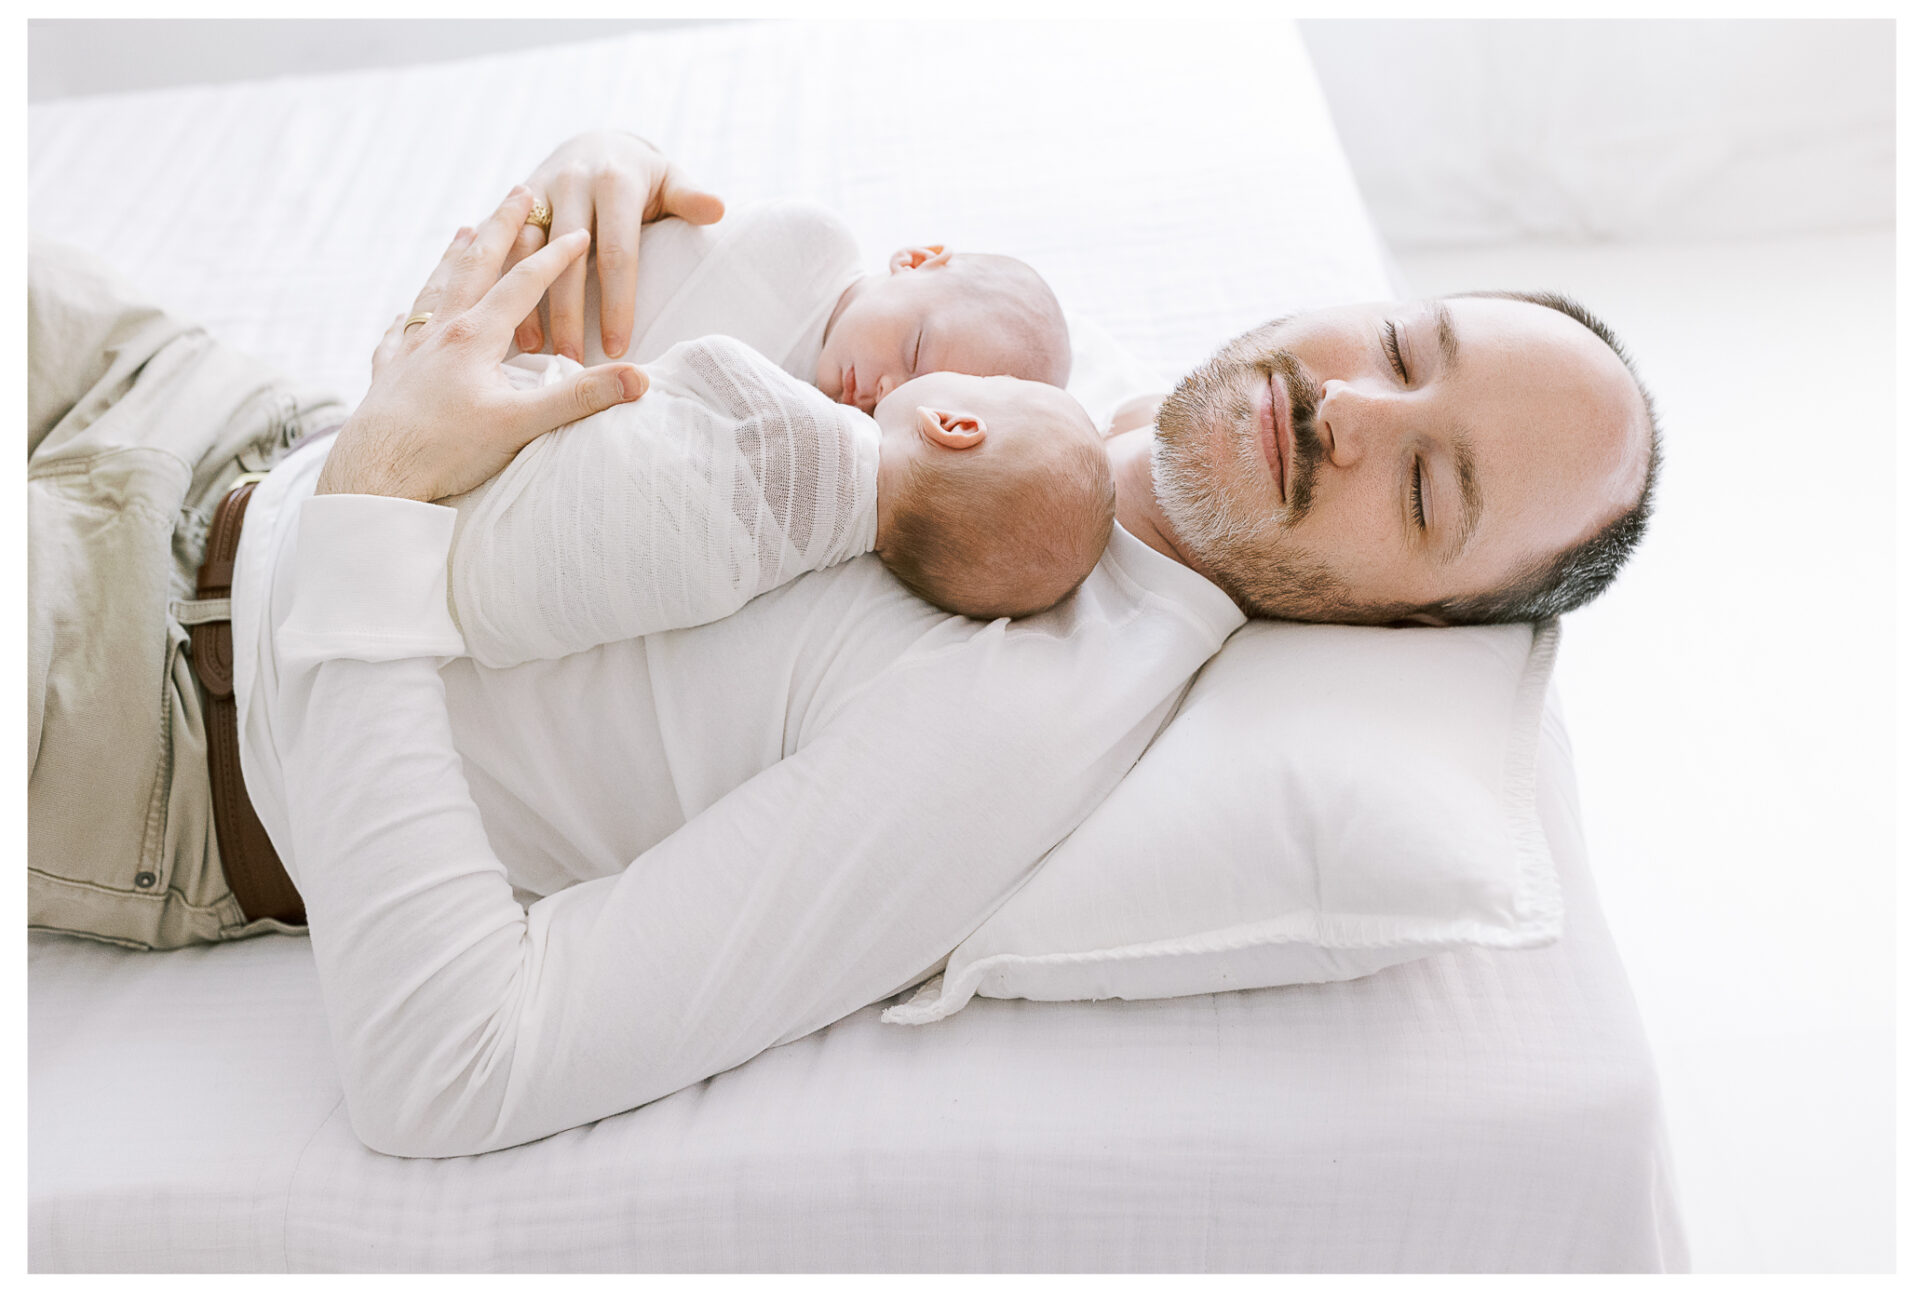 Dad snuggling his twin newborn baby boys on a white bed